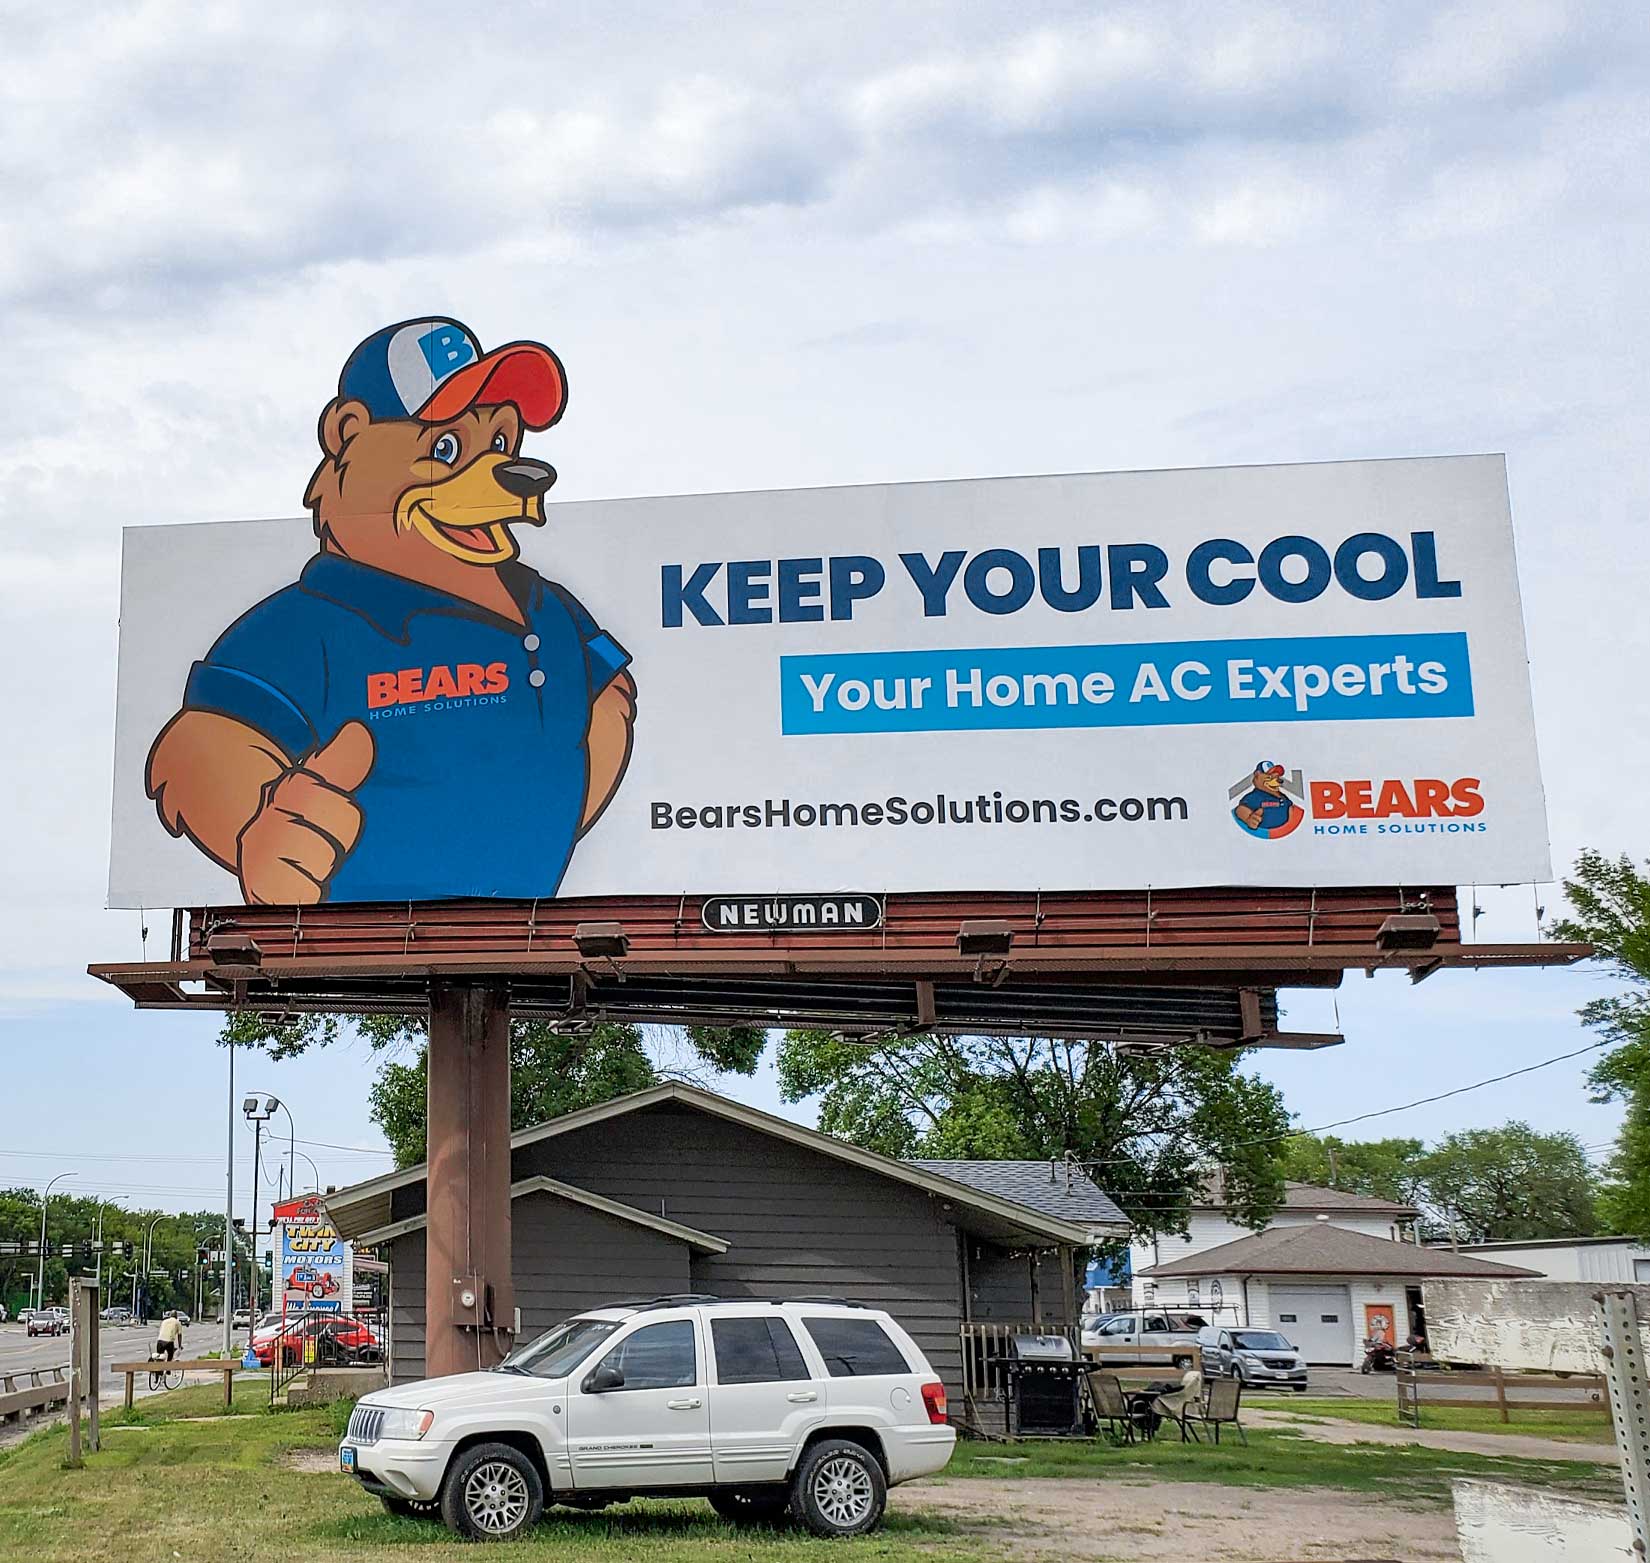 A static billboard promoting Bears Home Solutions’ air conditioning services along a main street in Grand Forks, ND